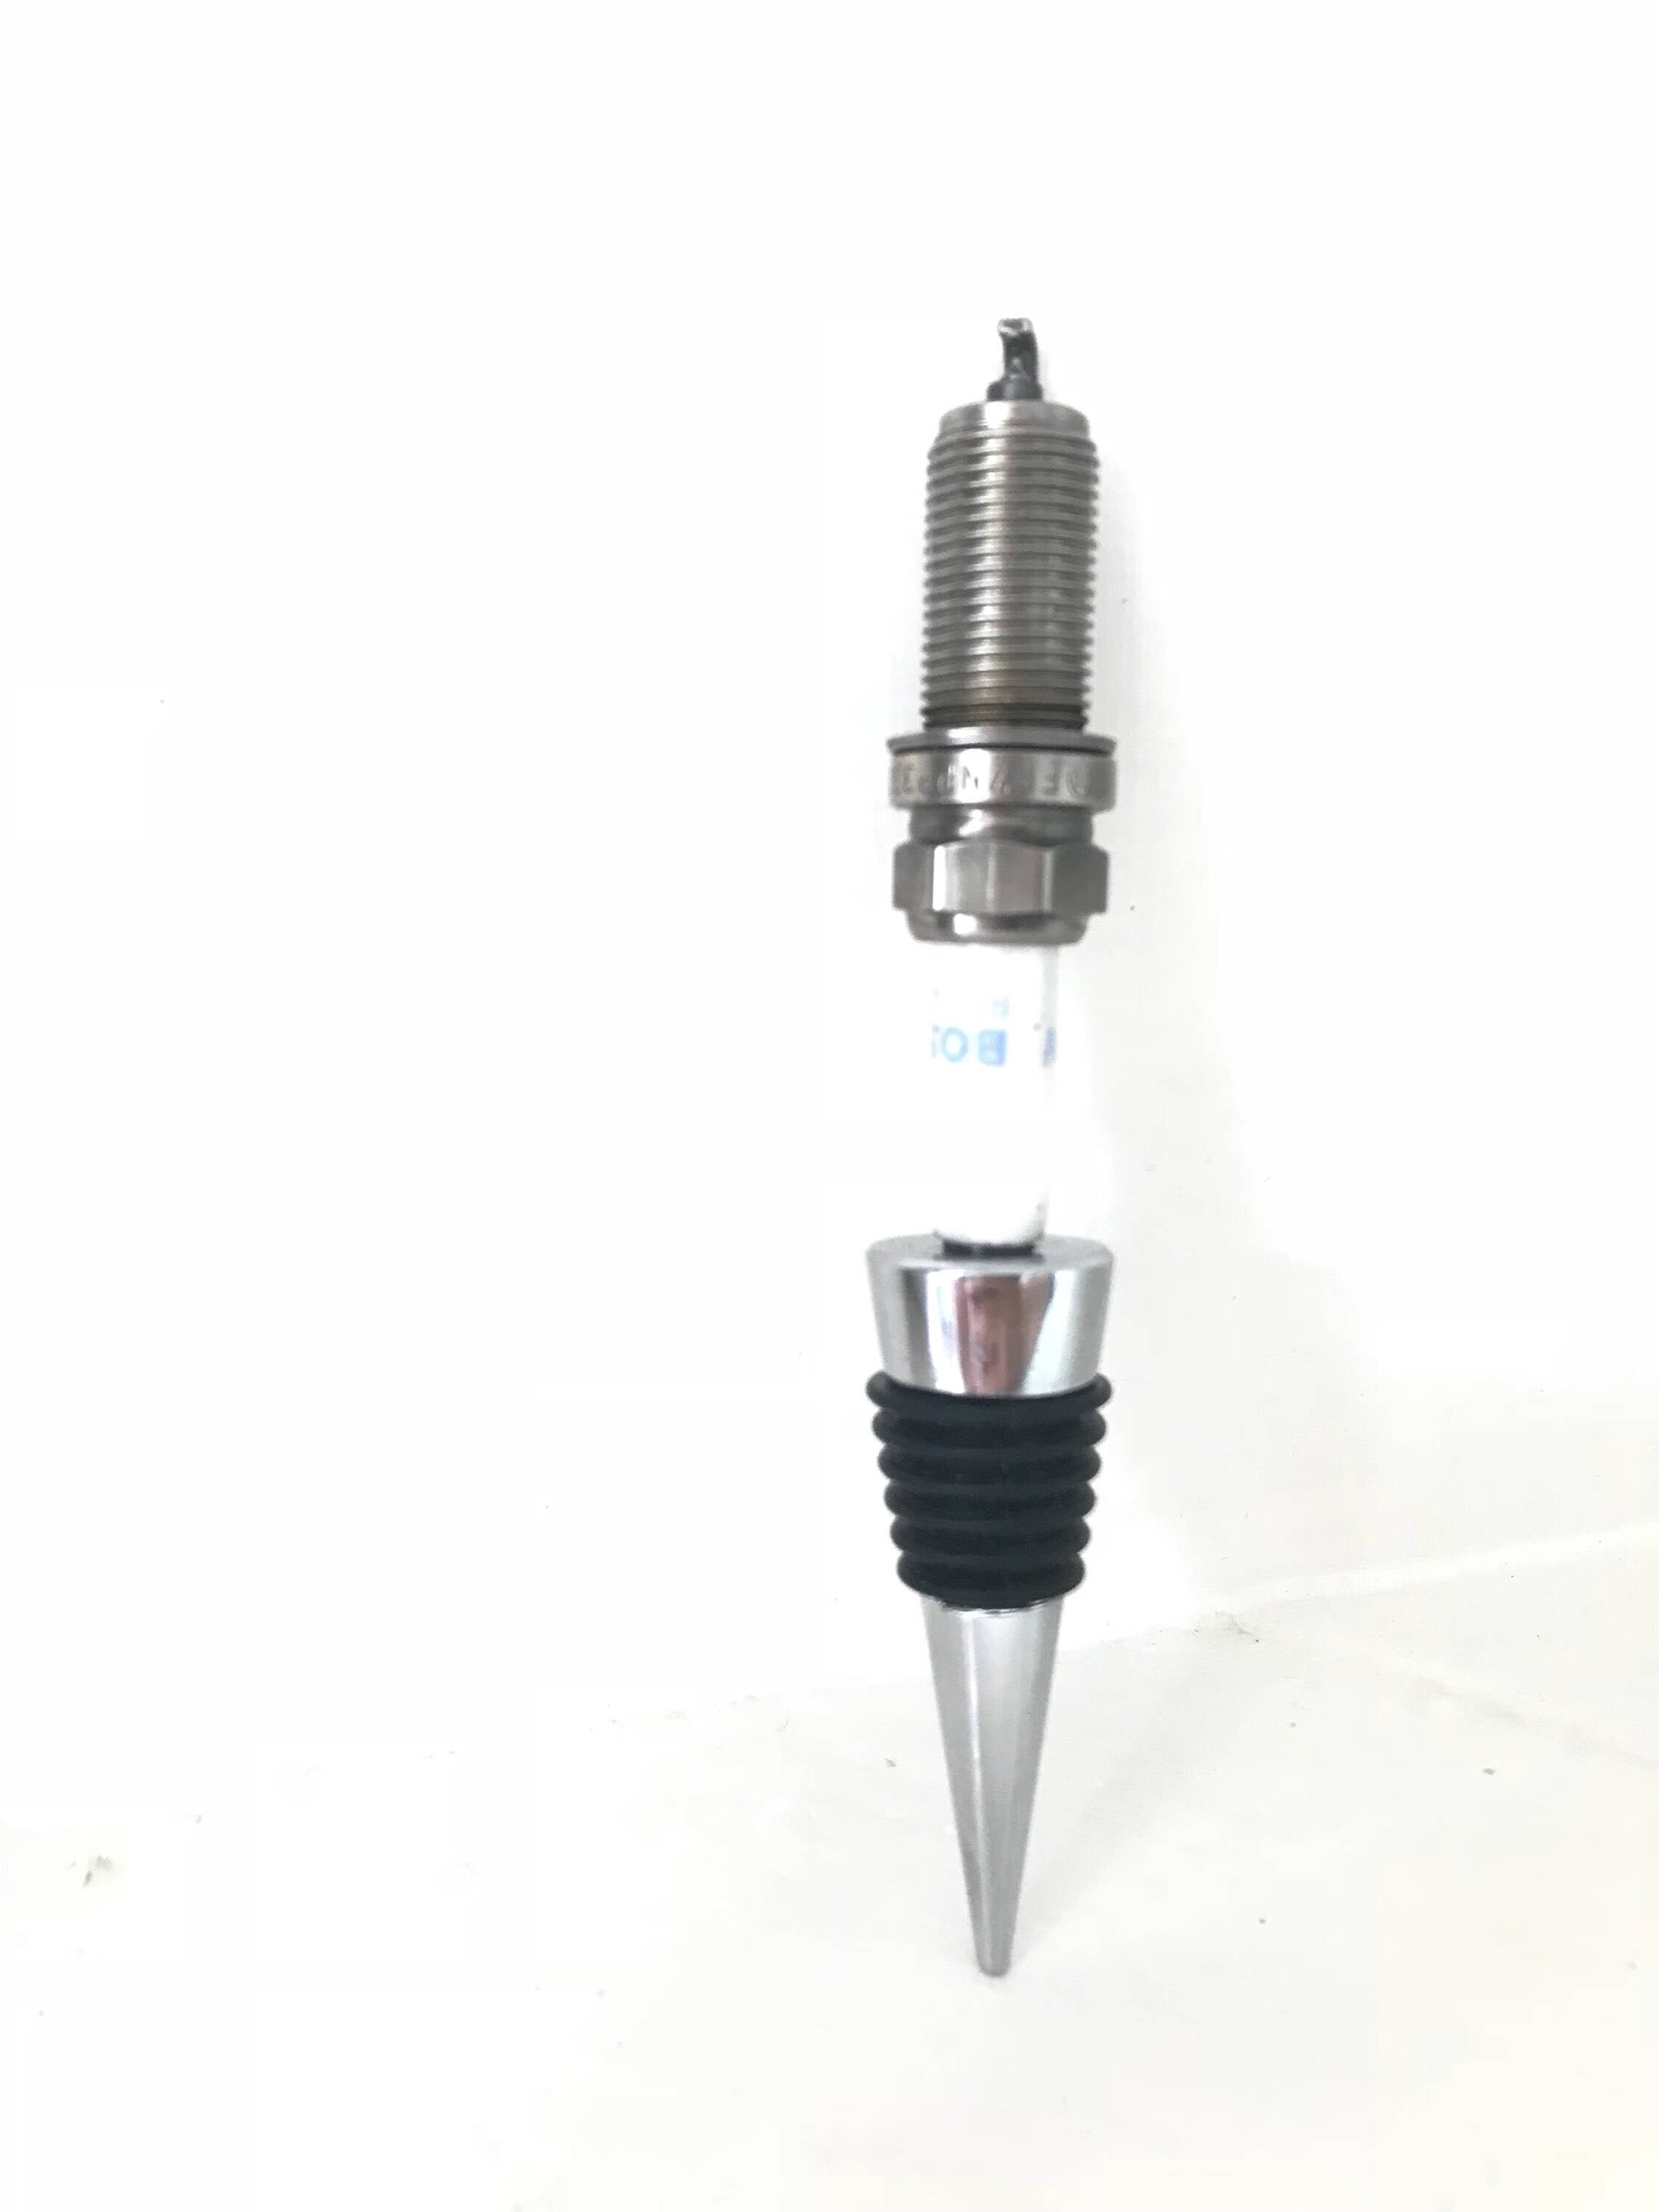 Bottle stopper made from a car's spark plug.